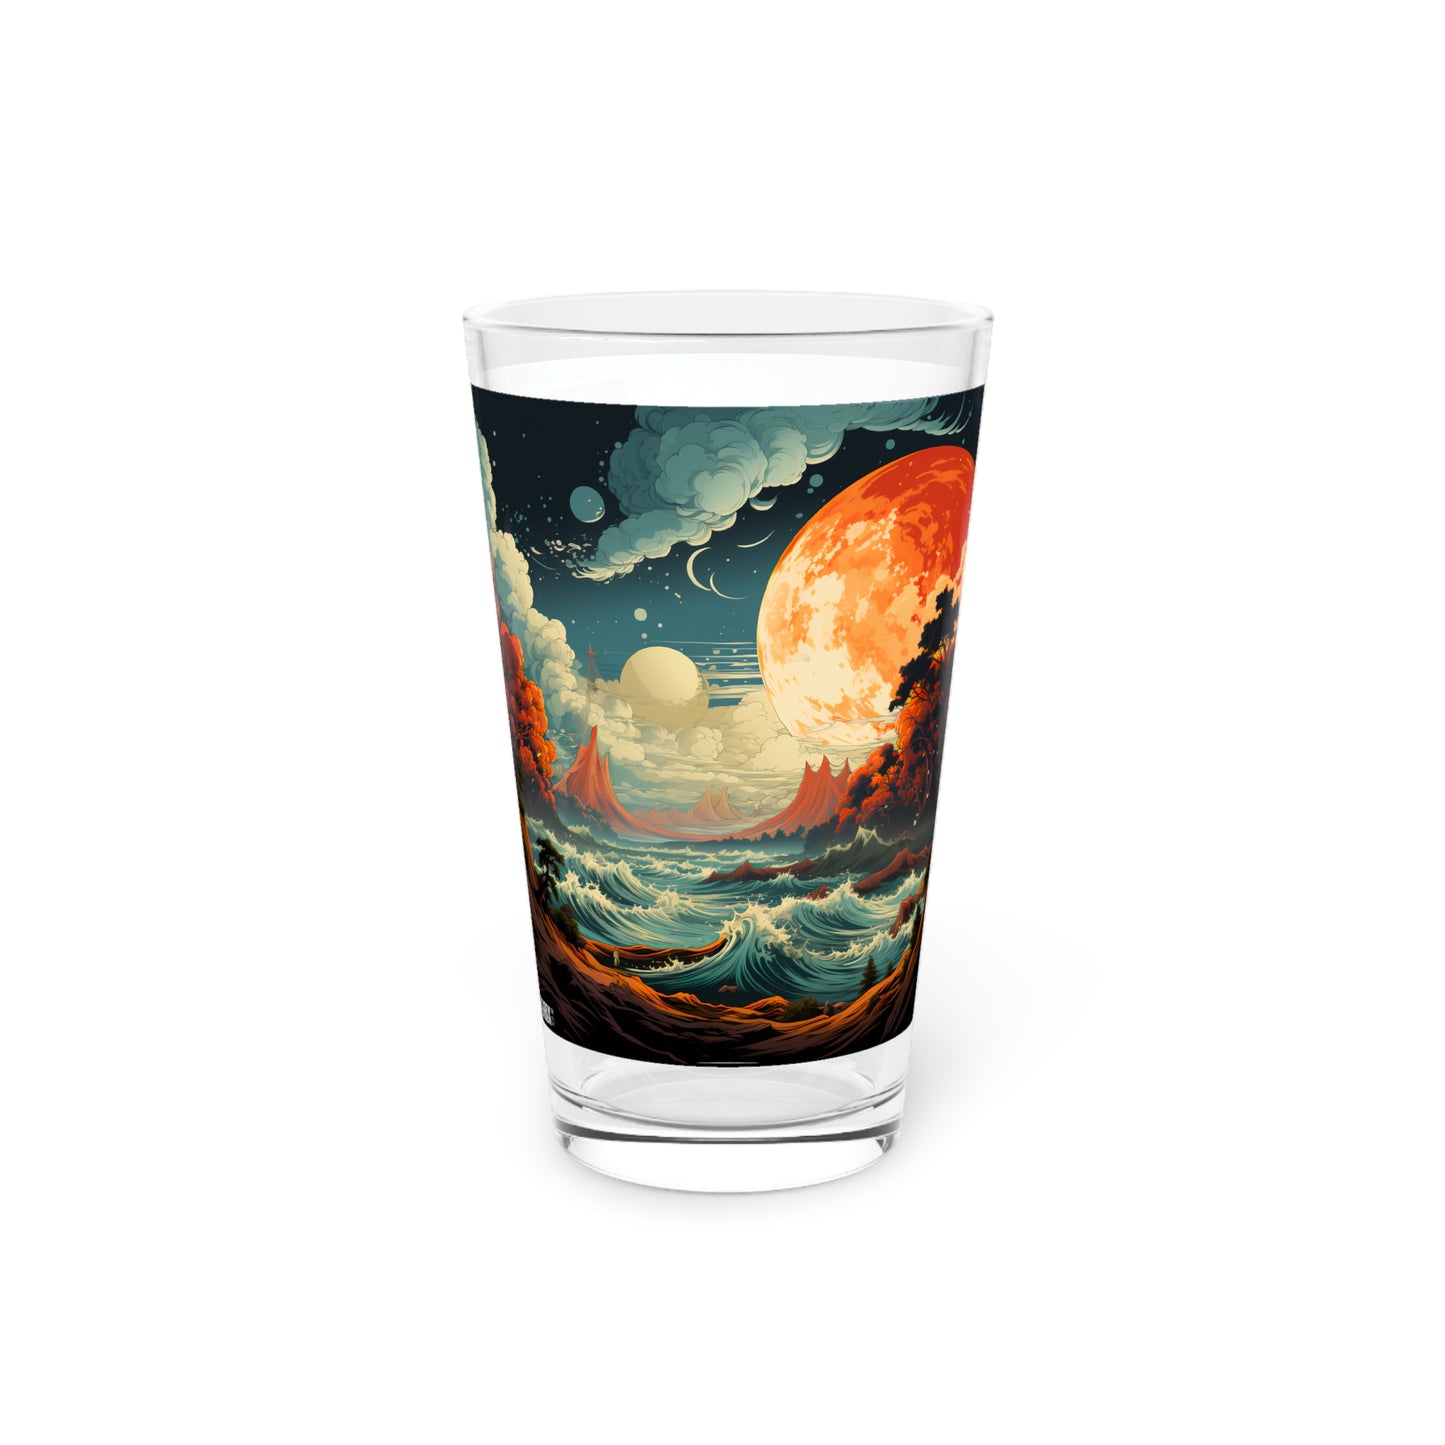 Sip in Coastal Splendor: Spacy Colorful Beach Waves Pint Glass, 16oz - Waves Design #037. Let the beach come to you with this vivid pint glass. Crafted for beach enthusiasts, its colorful waves design captures the magic of seaside sunsets. #BeachMagic #WaveArtistry #CoastalEscape